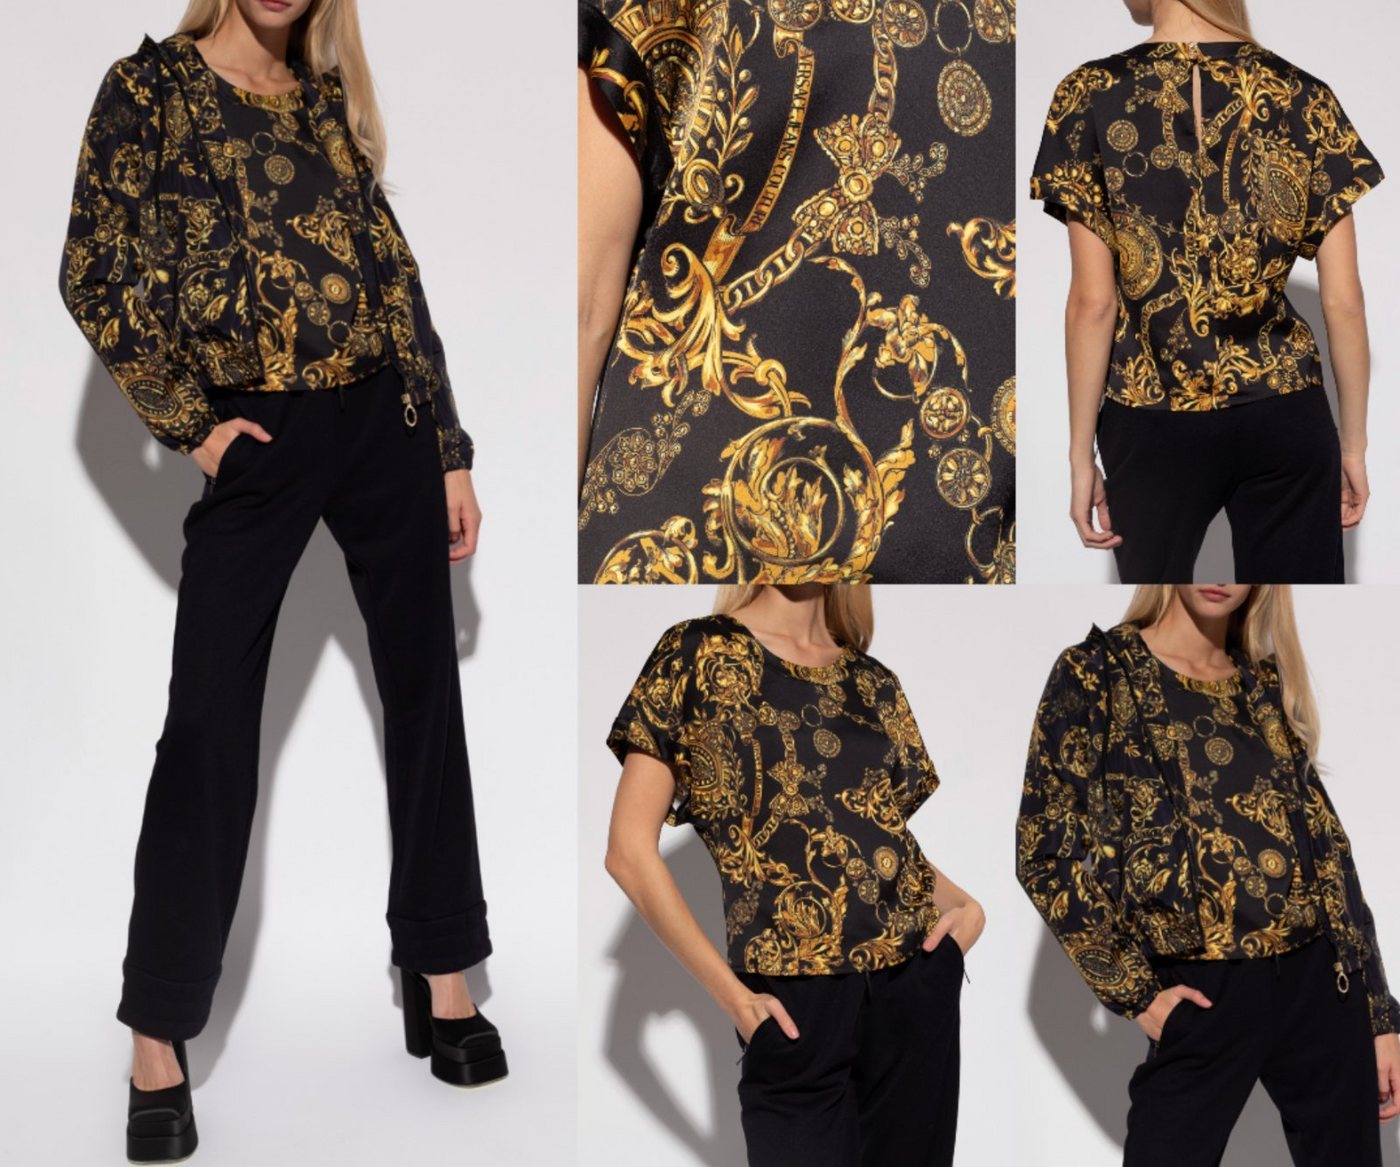 Versace T-Shirt VERSACE JEANS COUTURE PATTERNED Barock Top Bluse Shirt T-shirt Iconic von Versace